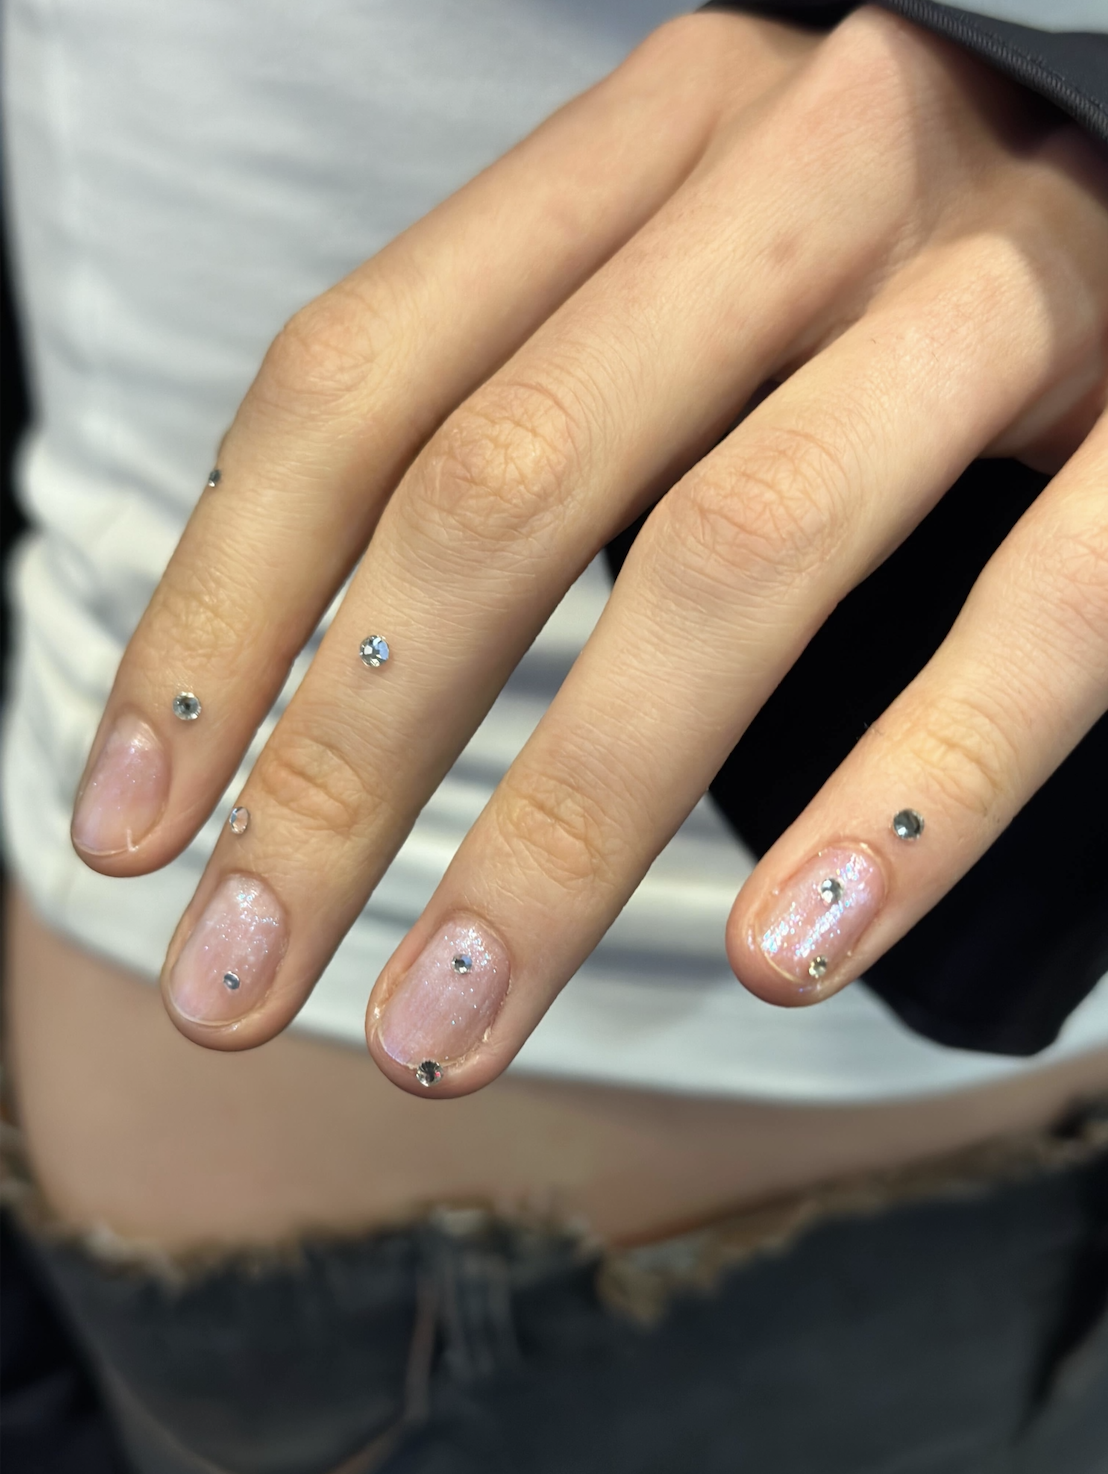 The 6 Nail Colors That Will Dominate Summer Manicure Trends - Fashionista